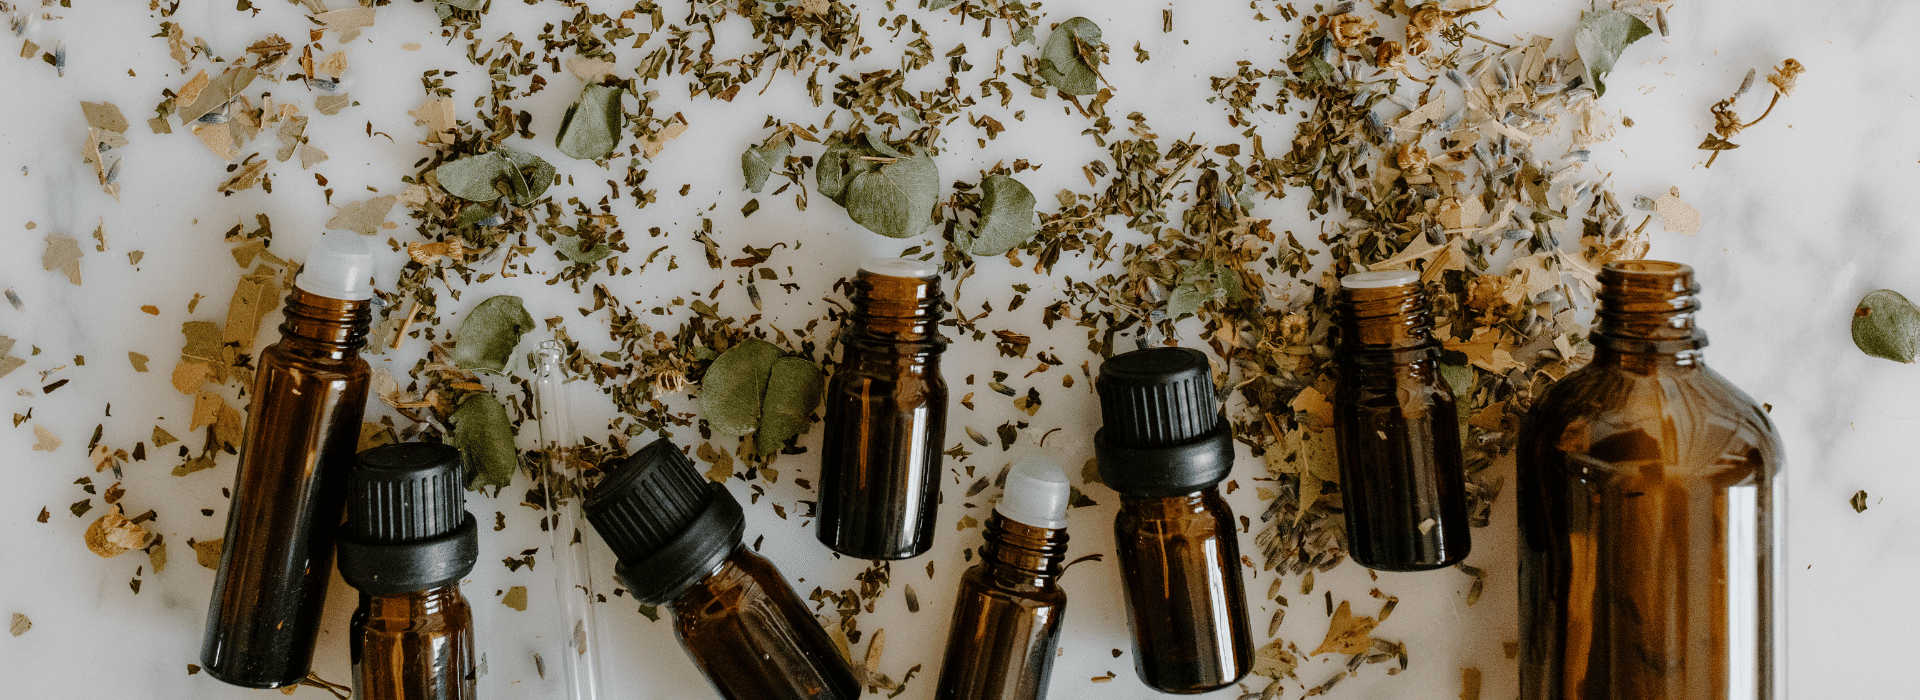 Our Key Ingredients Blog | Essential Oil bottles and petals | Shine Body & Bath